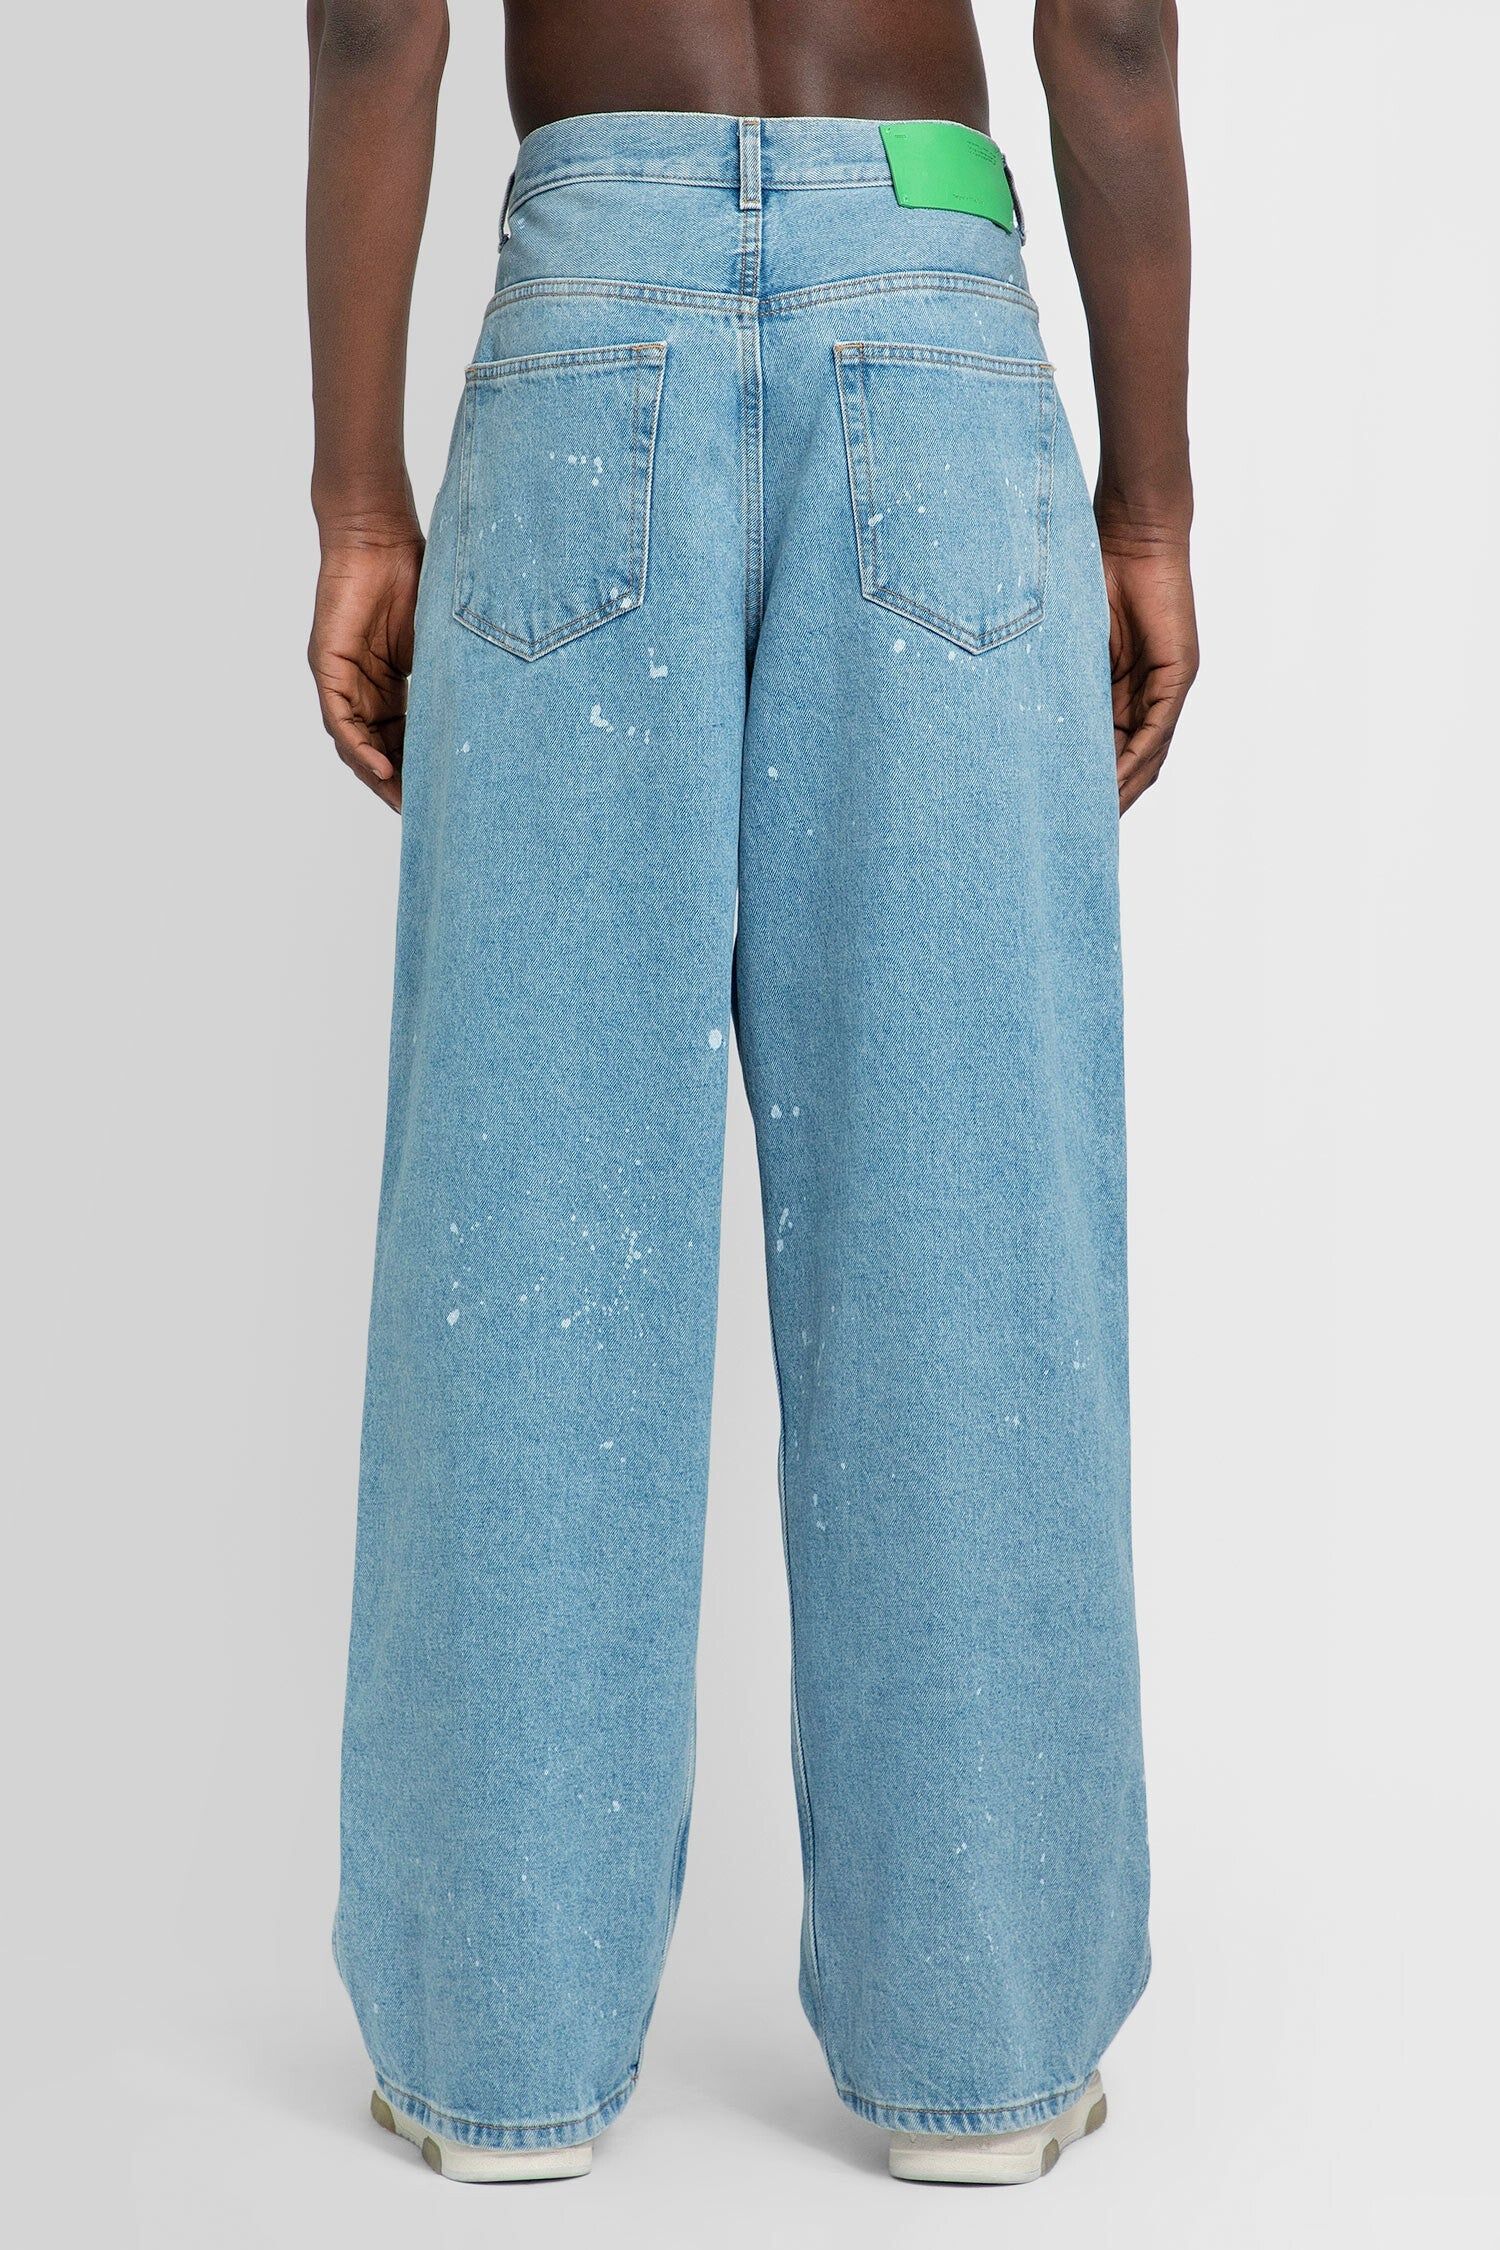 OFF-WHITE MAN BLUE JEANS - 4